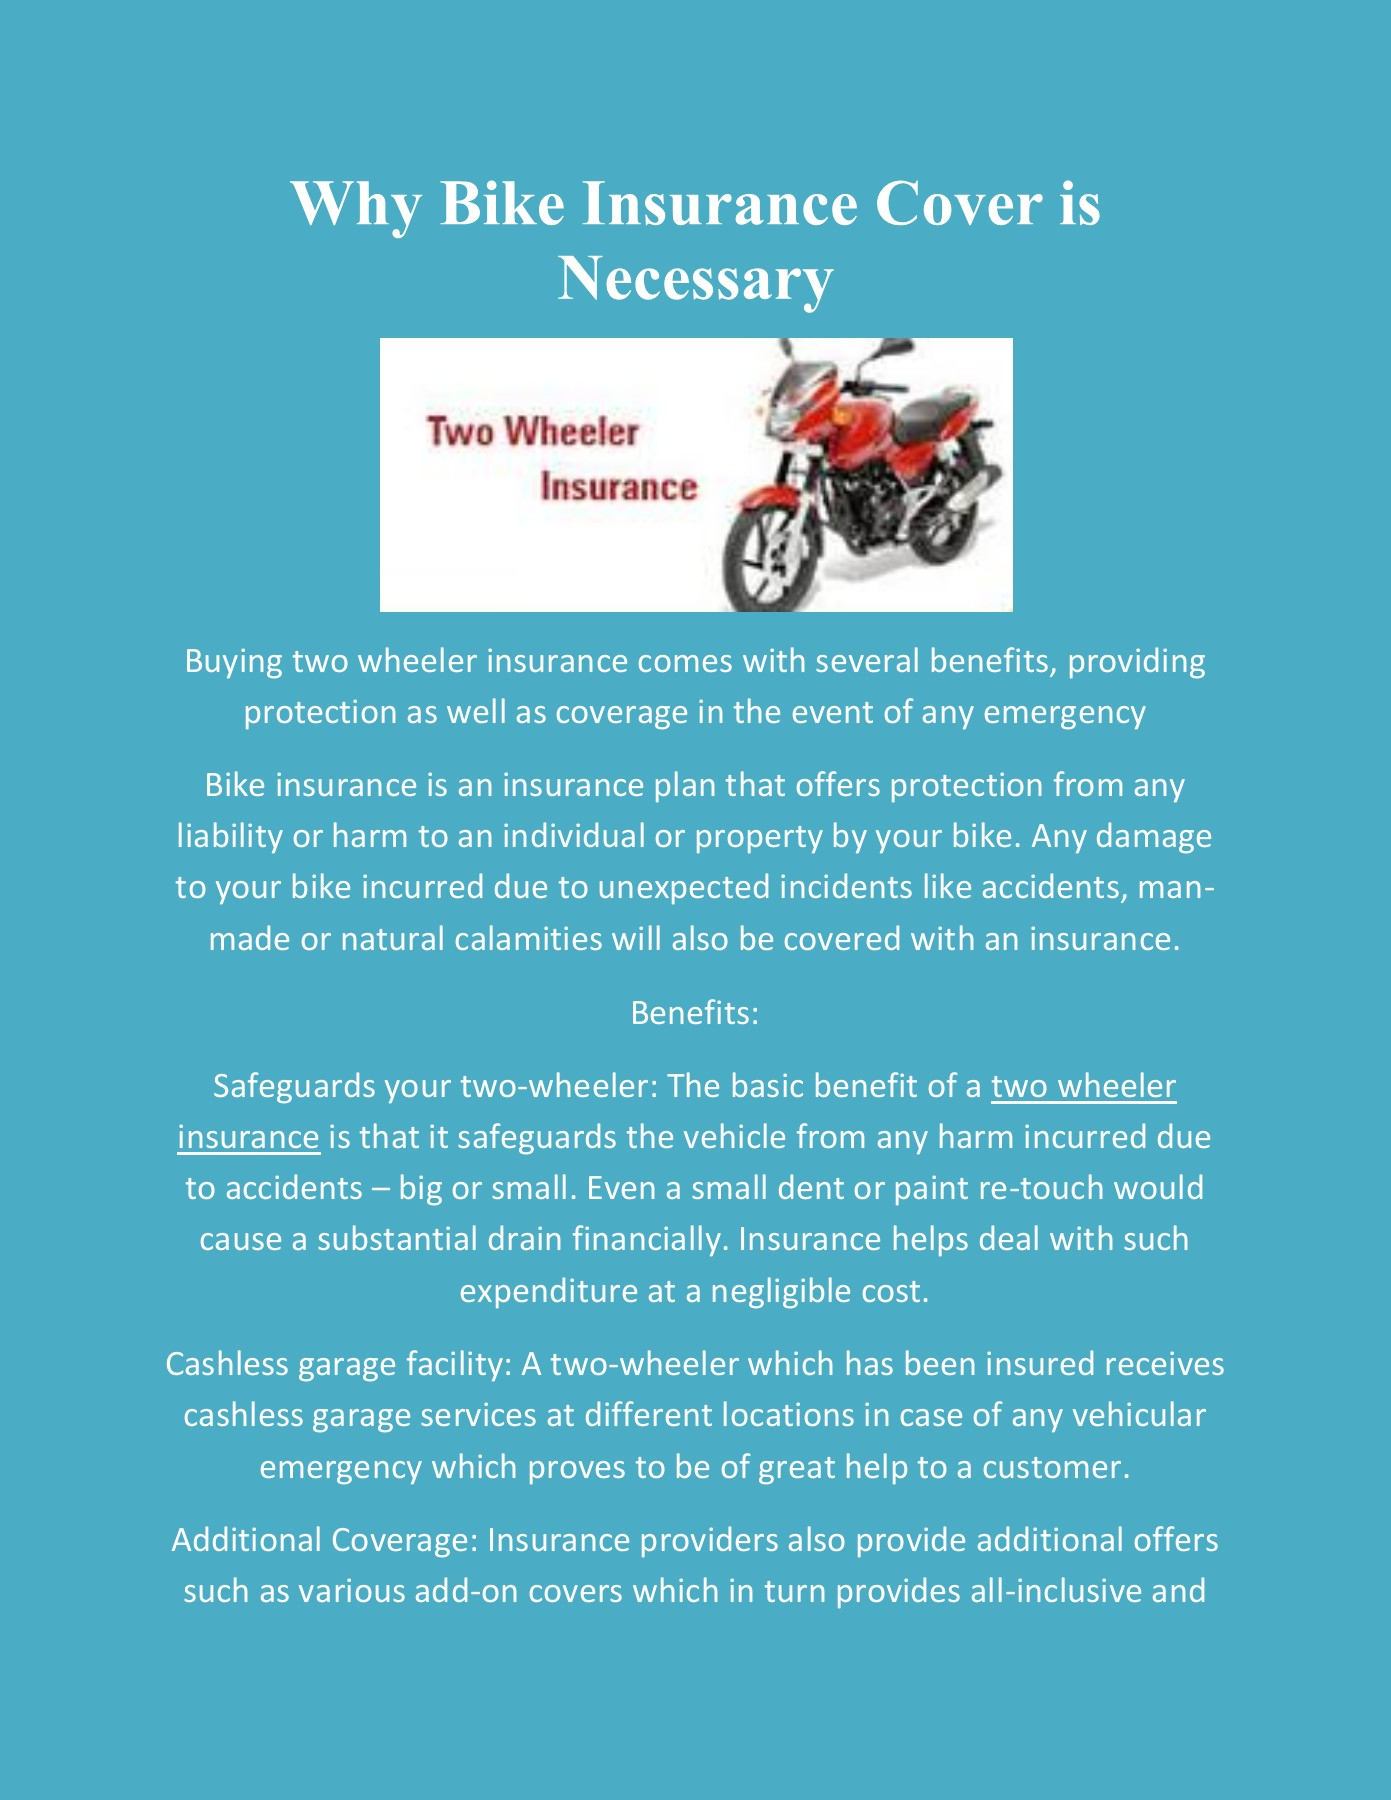 Why Bike Insurance Cover Is Necessary Pages 1 2 Text for size 1391 X 1800